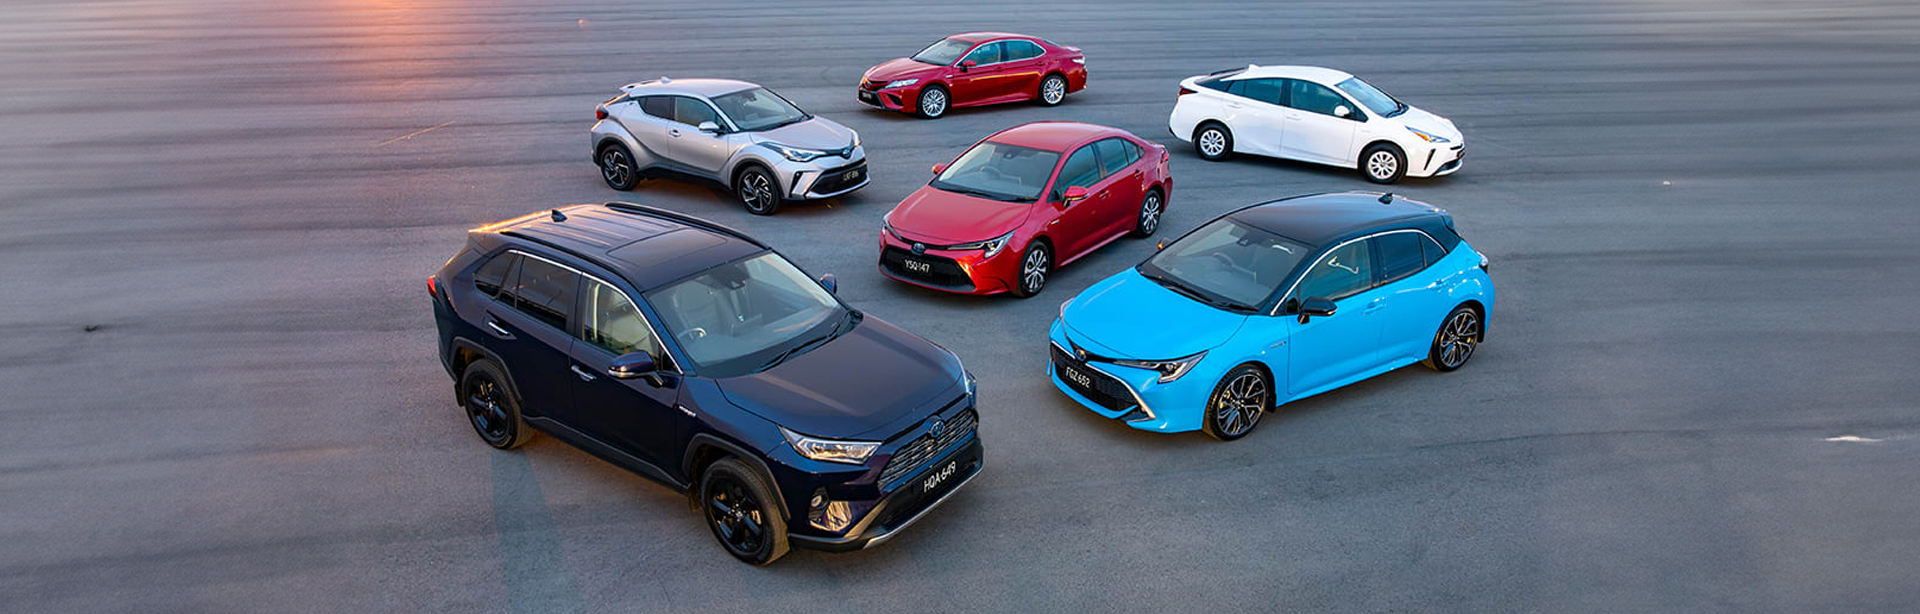 Toyota Hybrid Cars in Today's Market The Top 4 Advantages